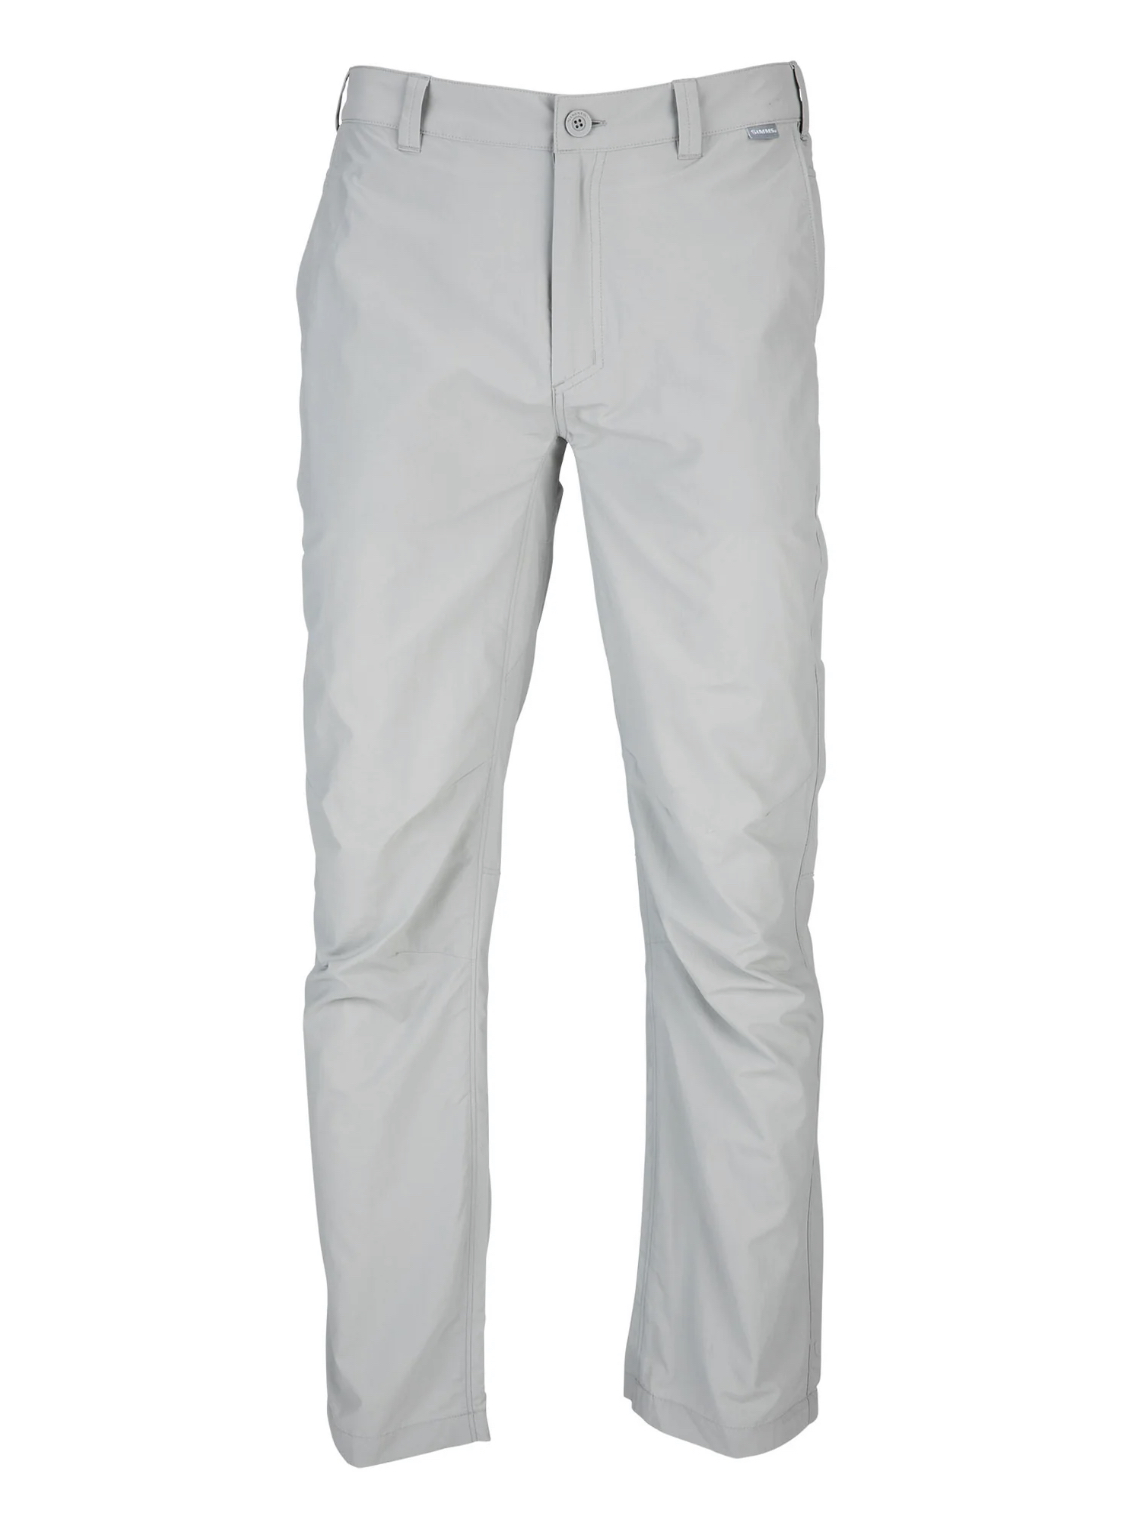 Simms M's Superlight Pant - Sterling - XL (38